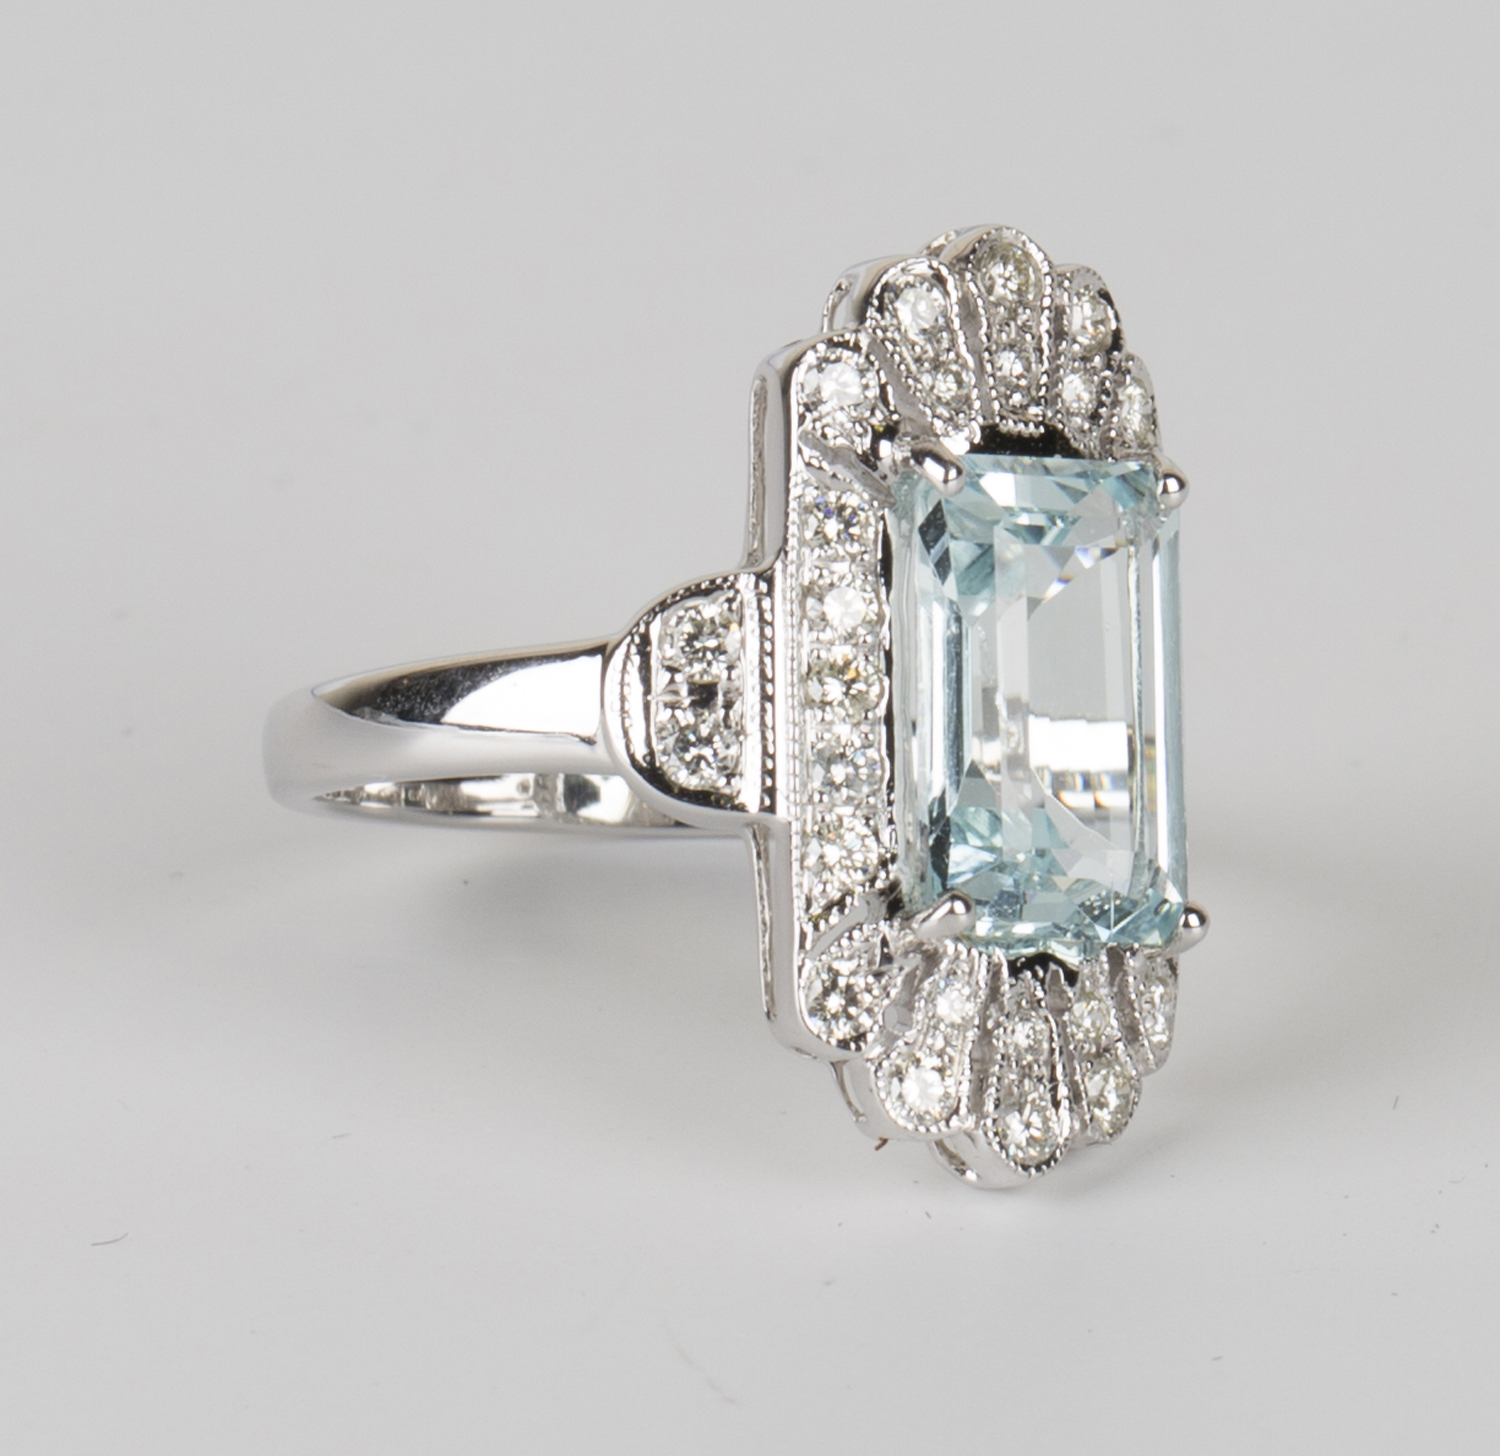 An 18ct white gold, aquamarine and diamond ring, claw set with a rectangular cut aquamarine within a